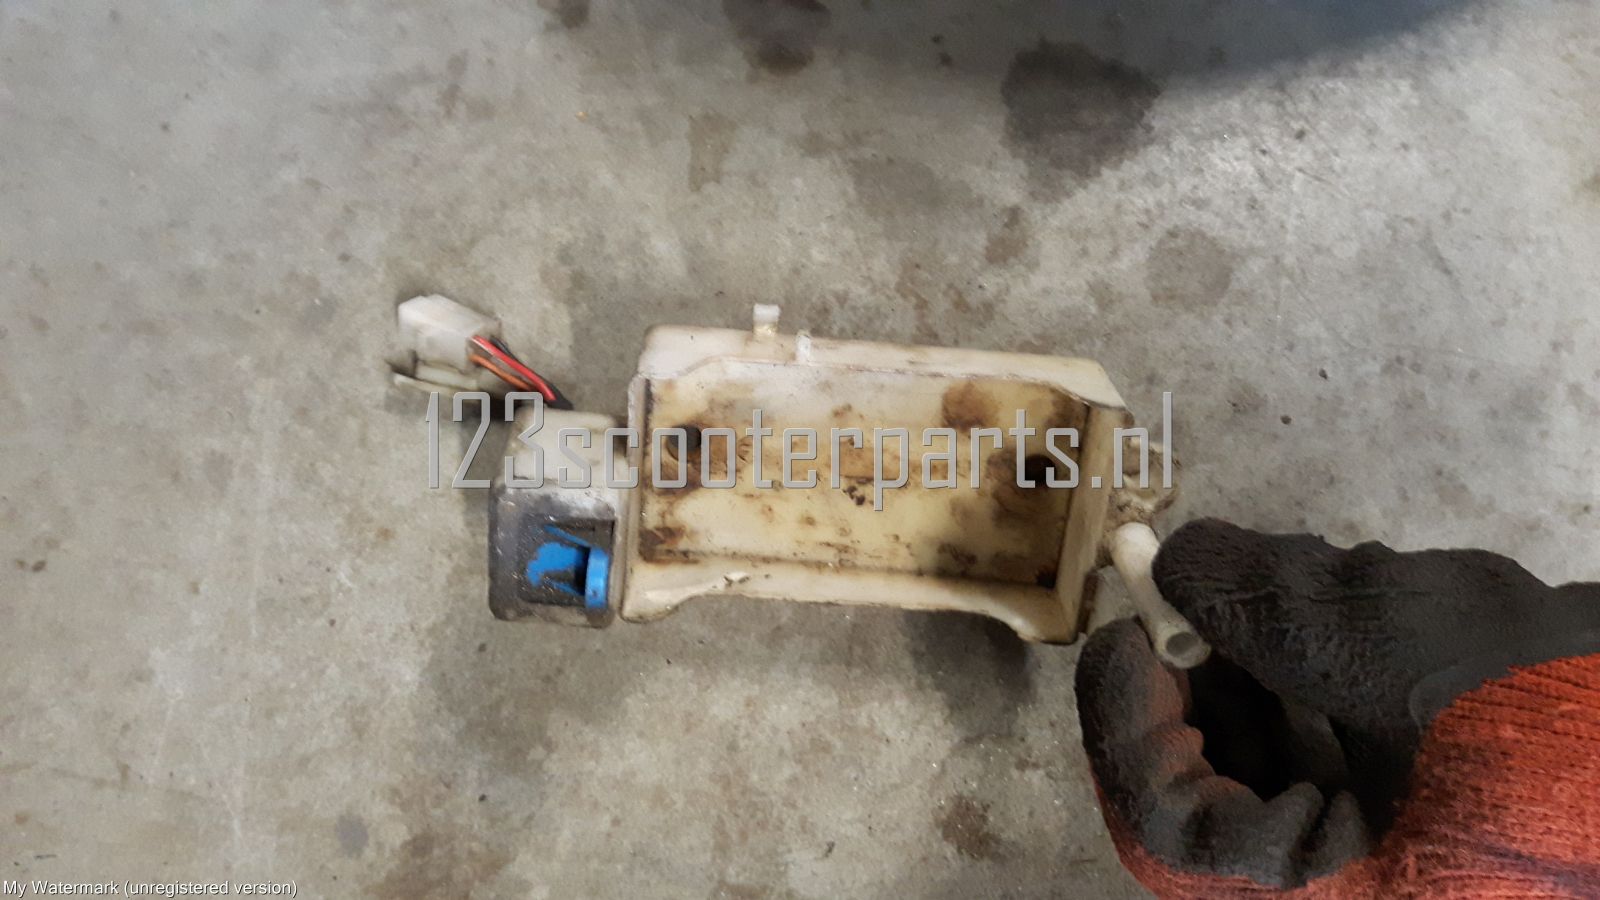 Battery for Adly Herchee Jet 50